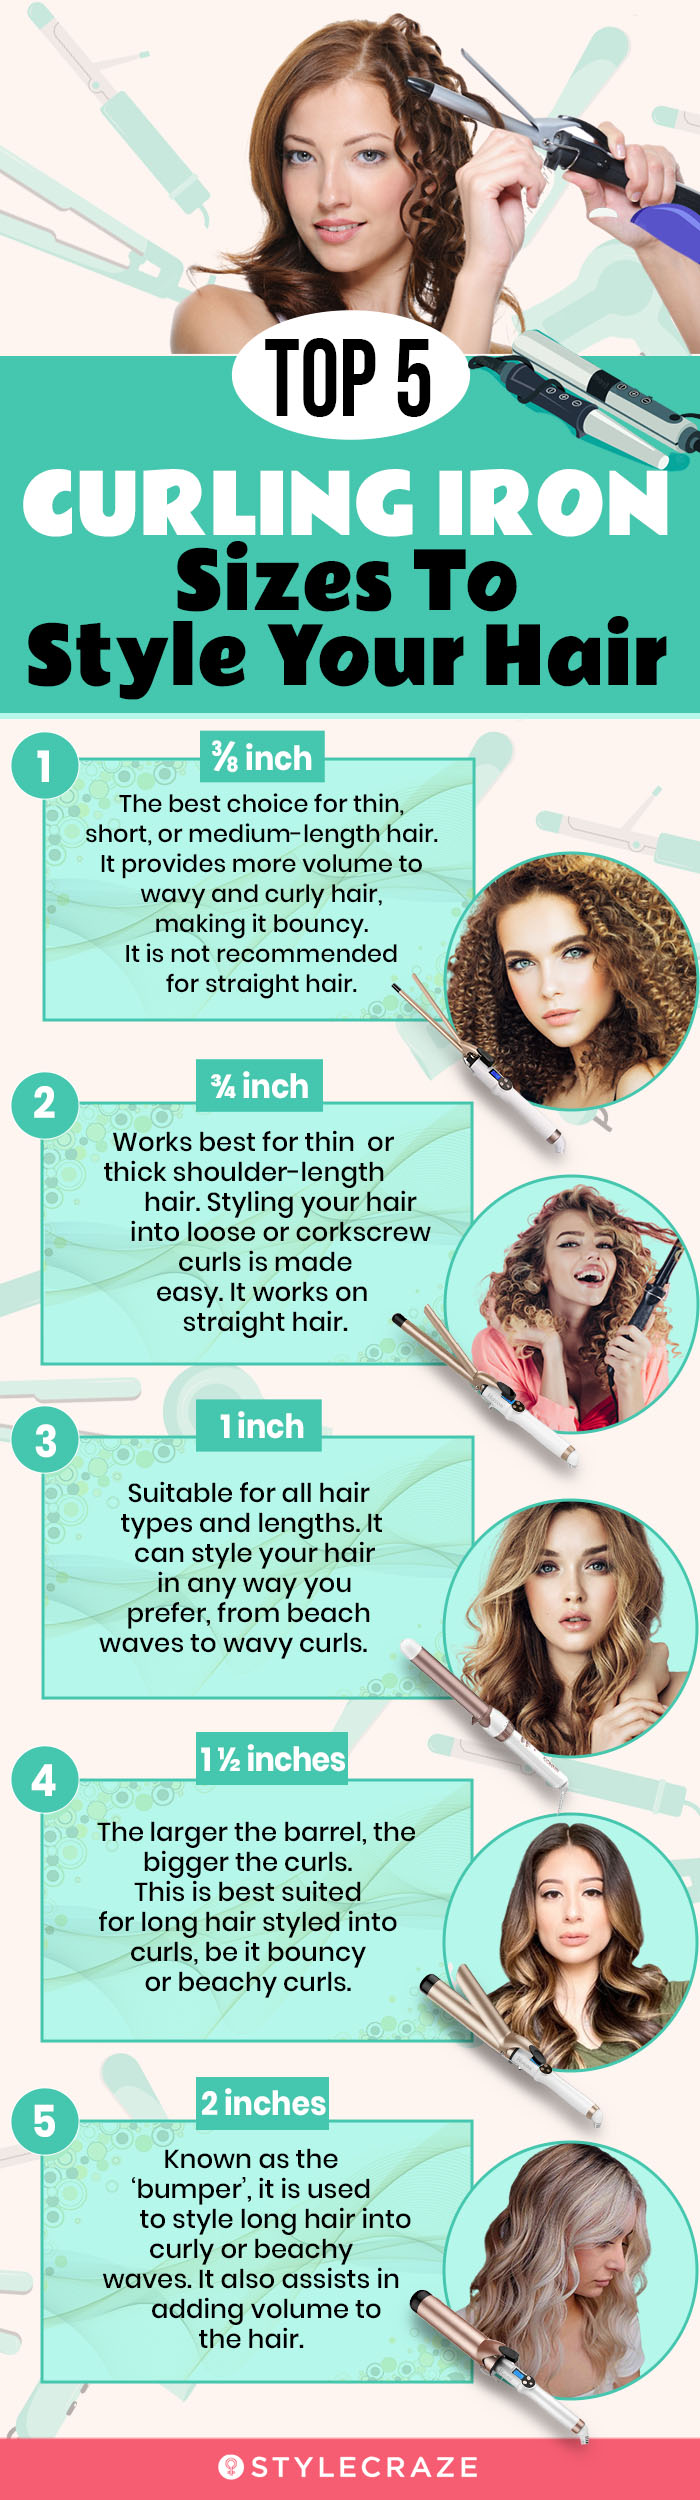 How to Use a Triple Barrel Waver: 13 Steps (with Pictures)